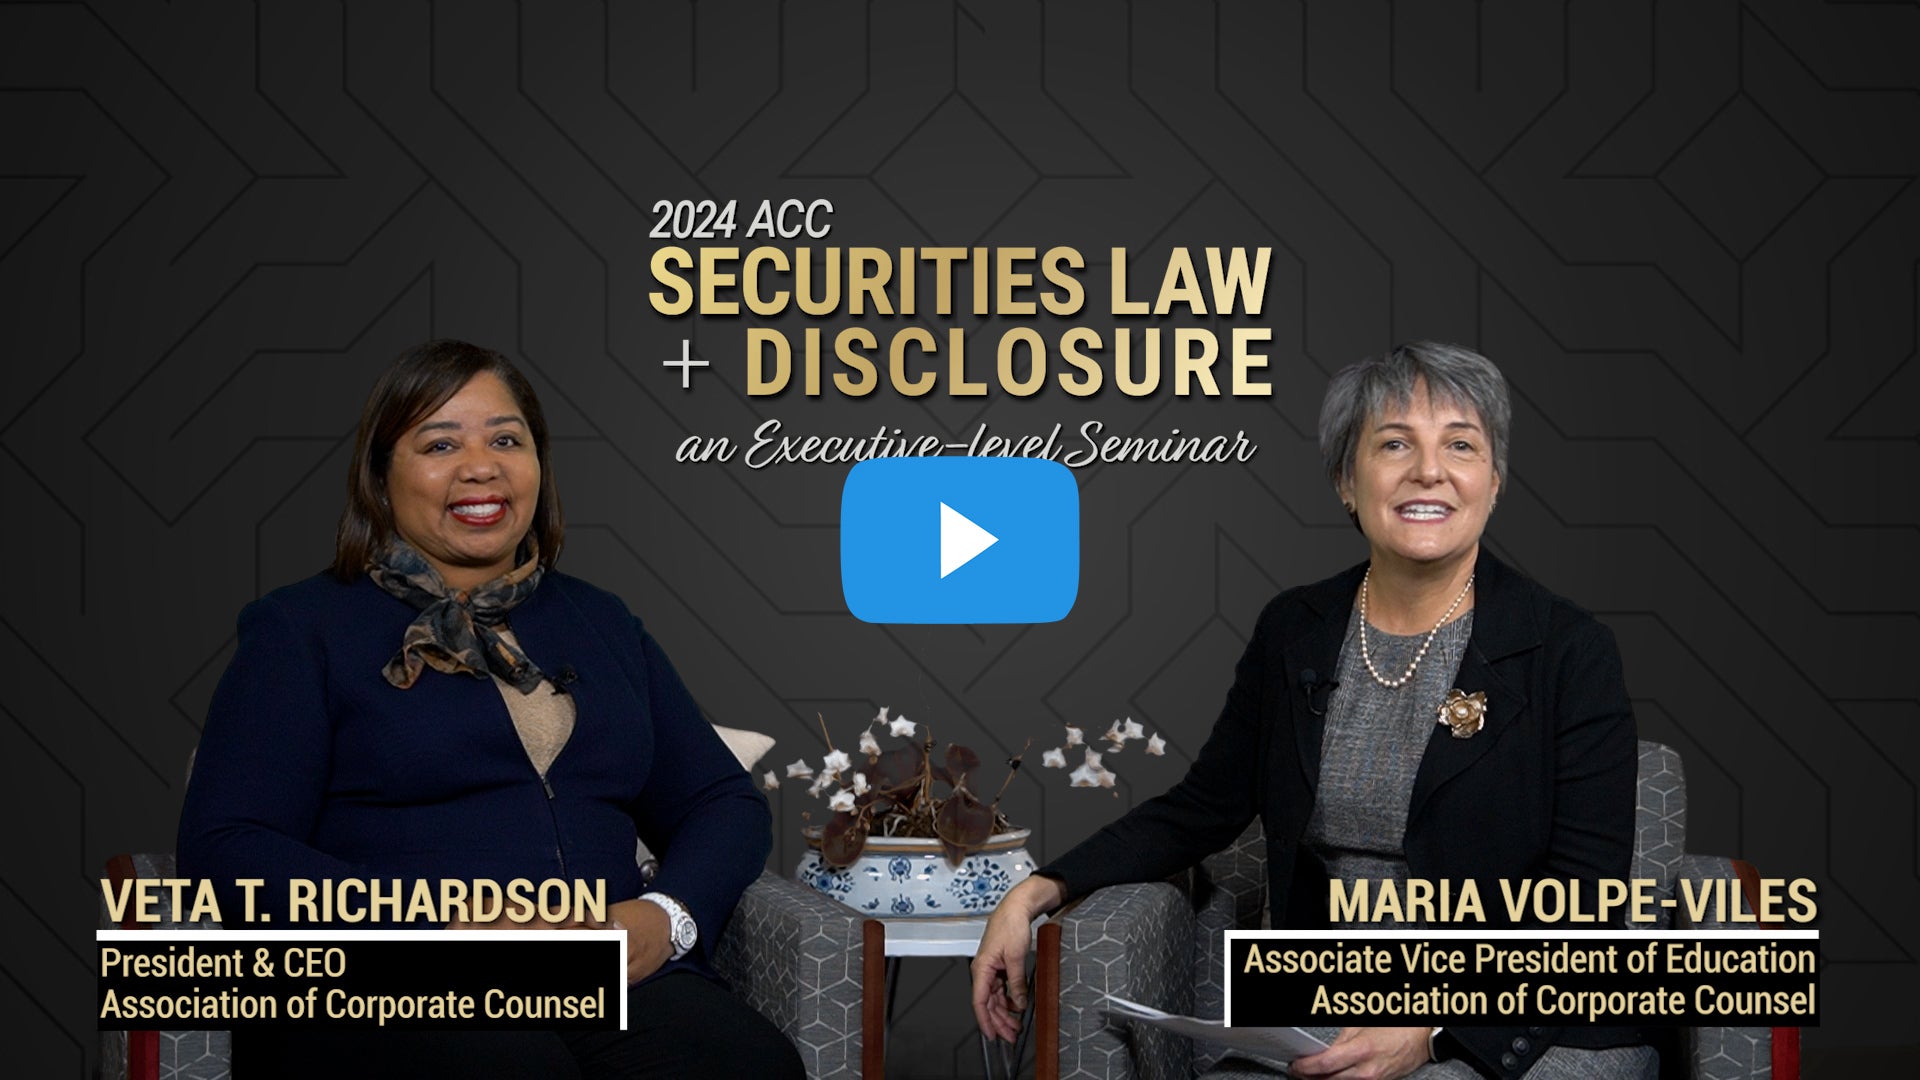 2024 ACC Securities Law + Disclosure an Executive Level Seminar ACC Association of Corporate Counsel Veta T. Richardson President & CEO Maria Volpe-Viles Associate Vice President of Education